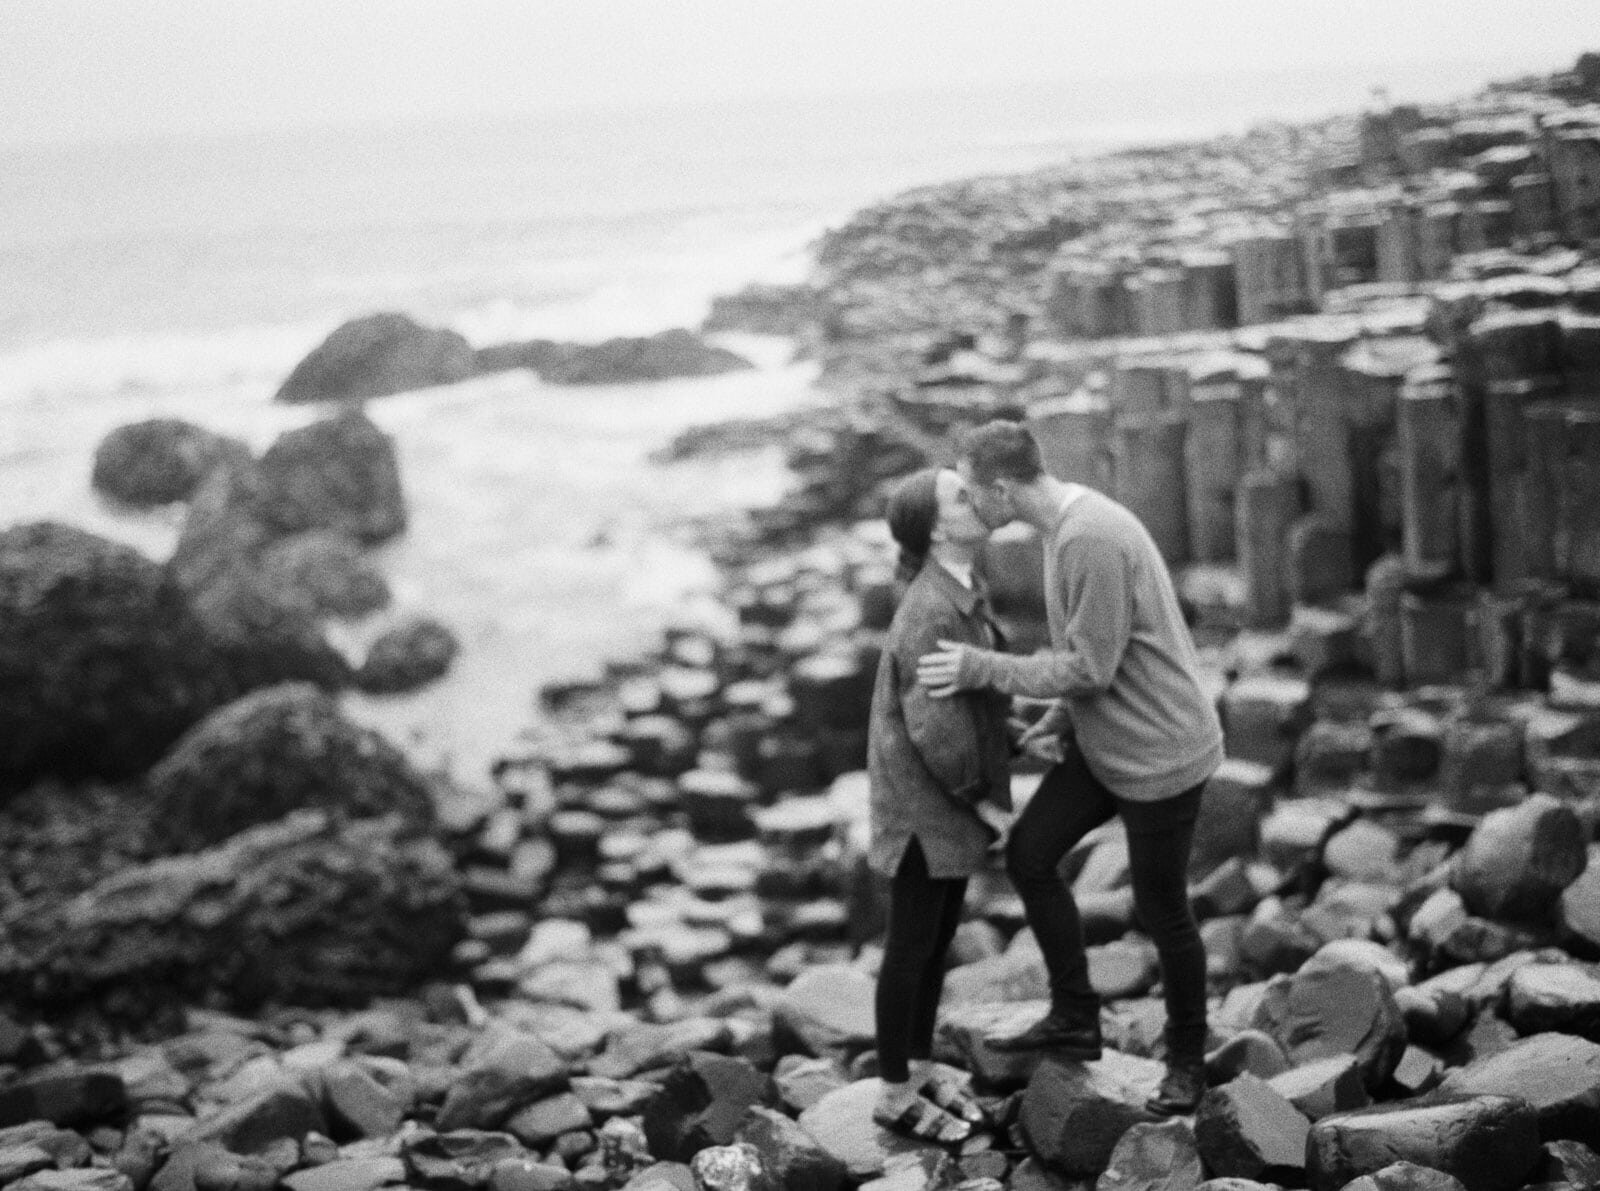 Giants-Causeway-Engagement-session-Krmorenophoto-30